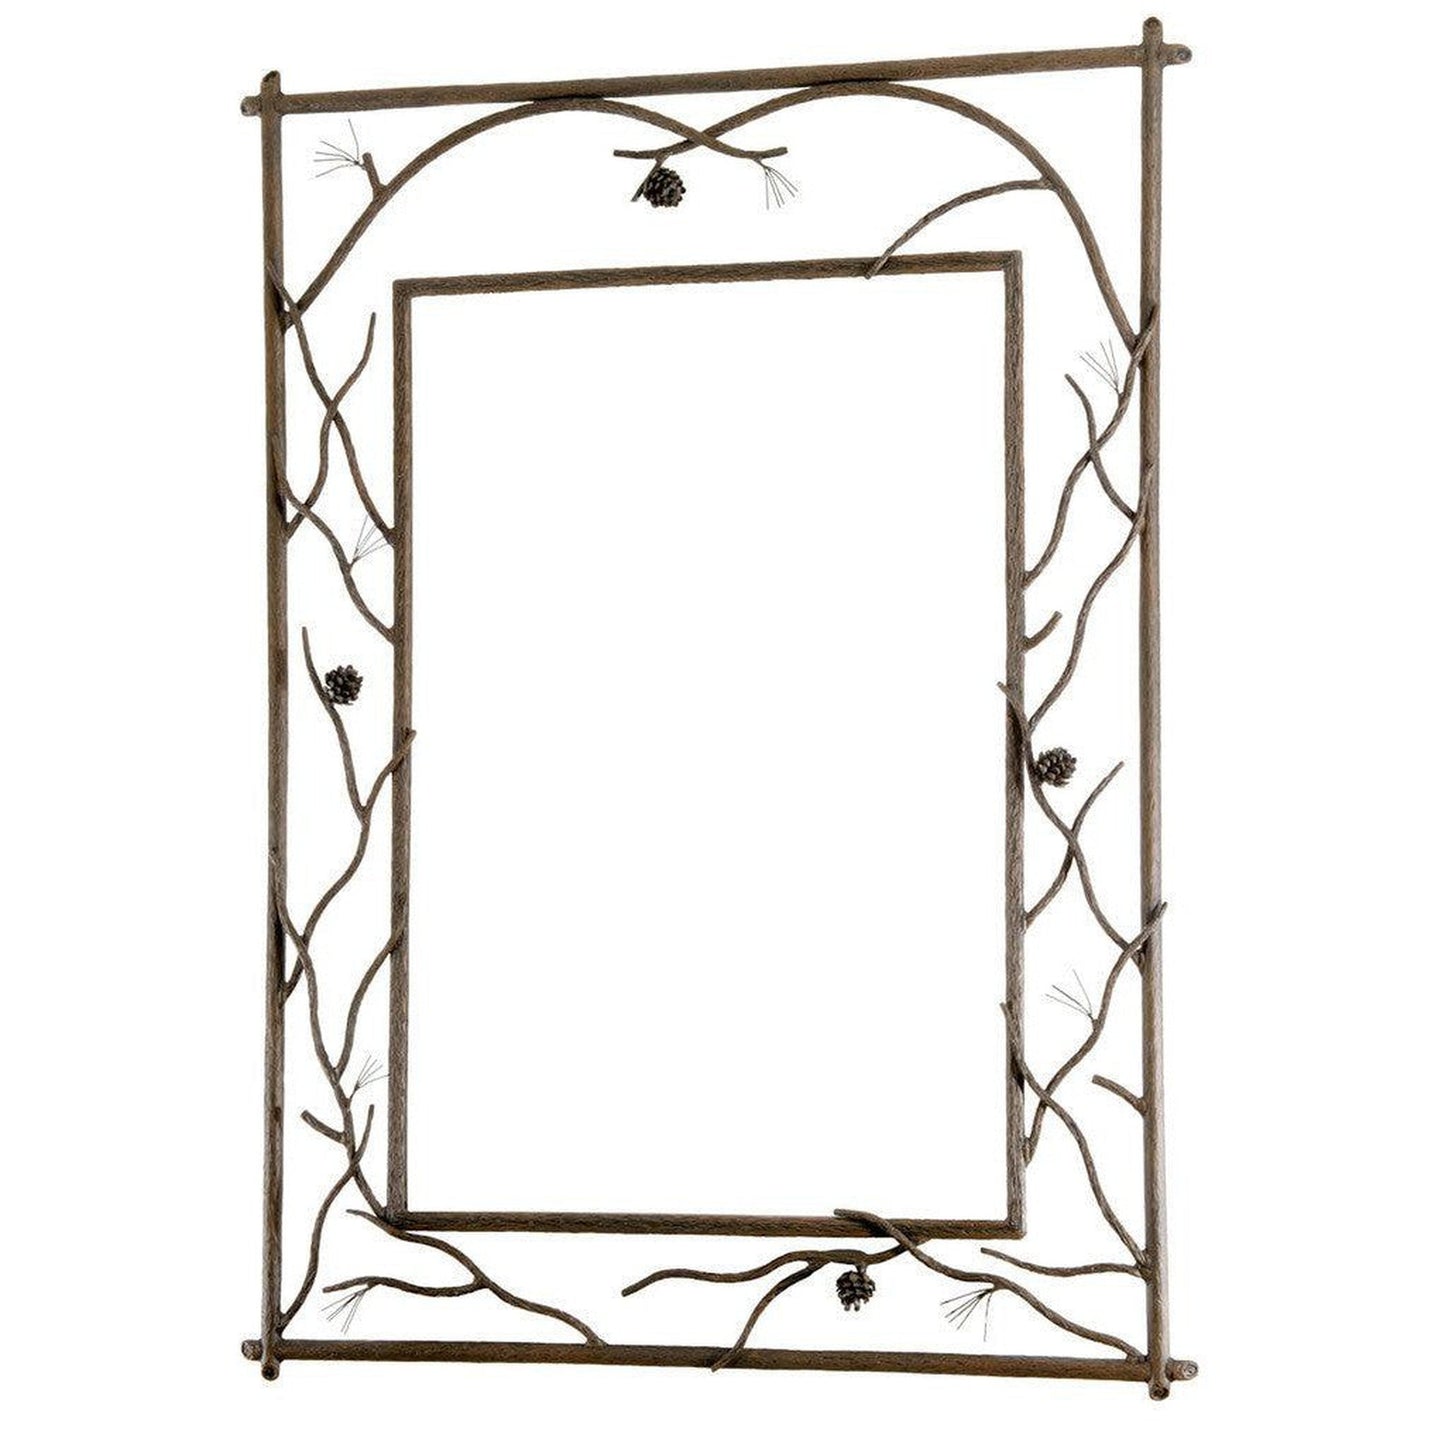 Stone County Ironworks Pine 37" x 51" Large Hand Rubbed Brass Branched Iron Wall Mirror With Gold Iron Accent